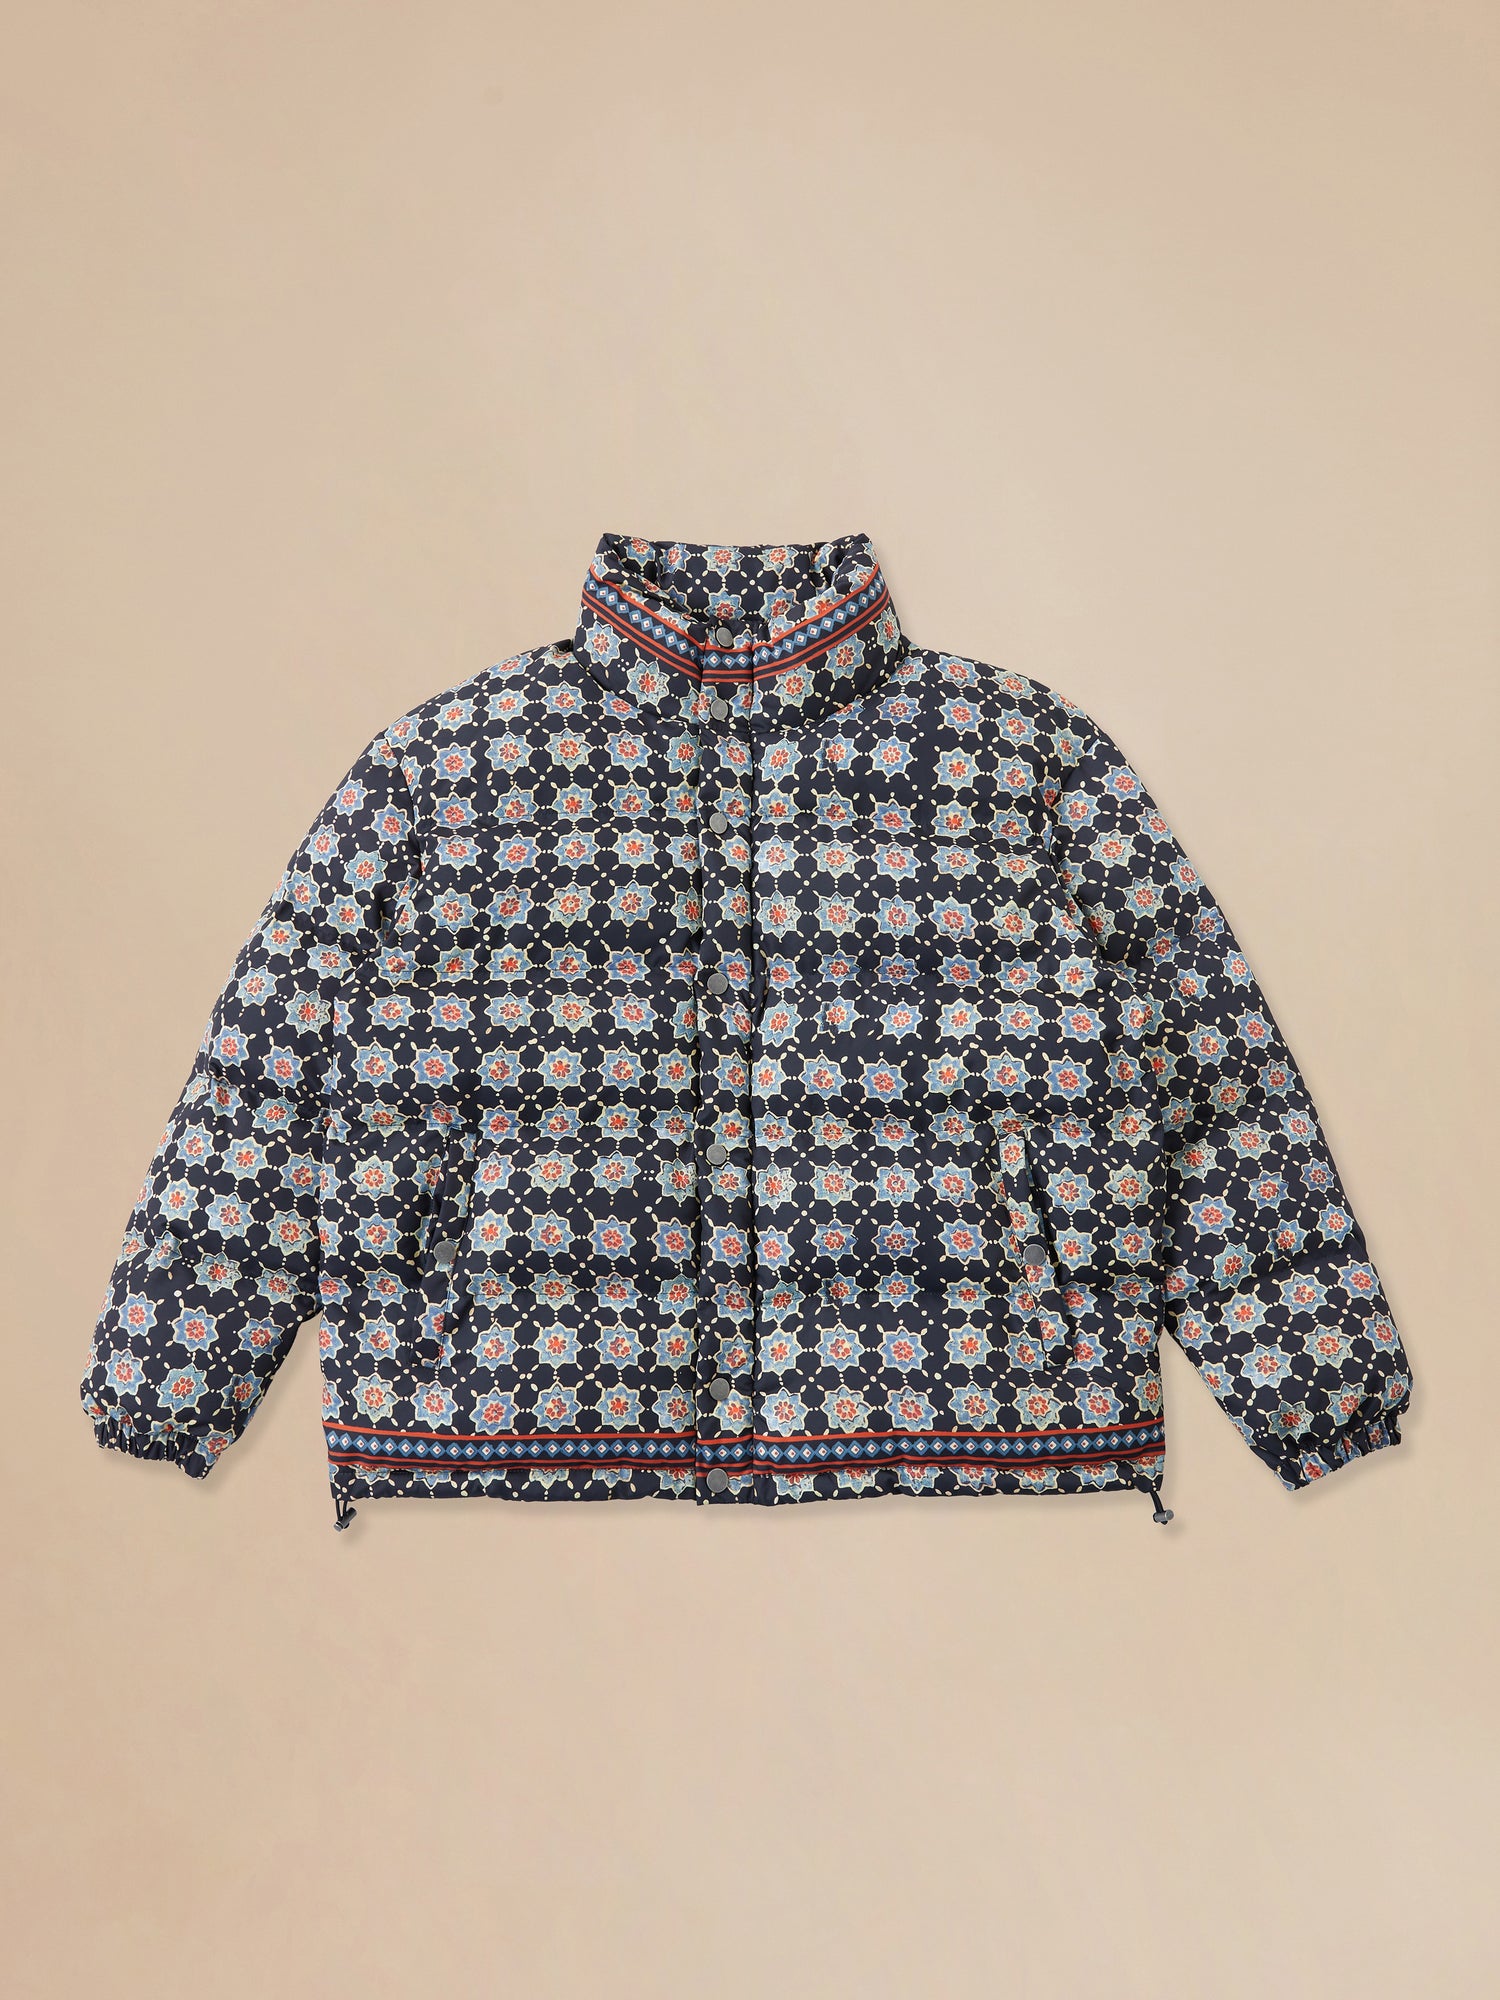 A Coming Soon | Ajrak Block Puffer Jacket by Found, with a floral pattern.